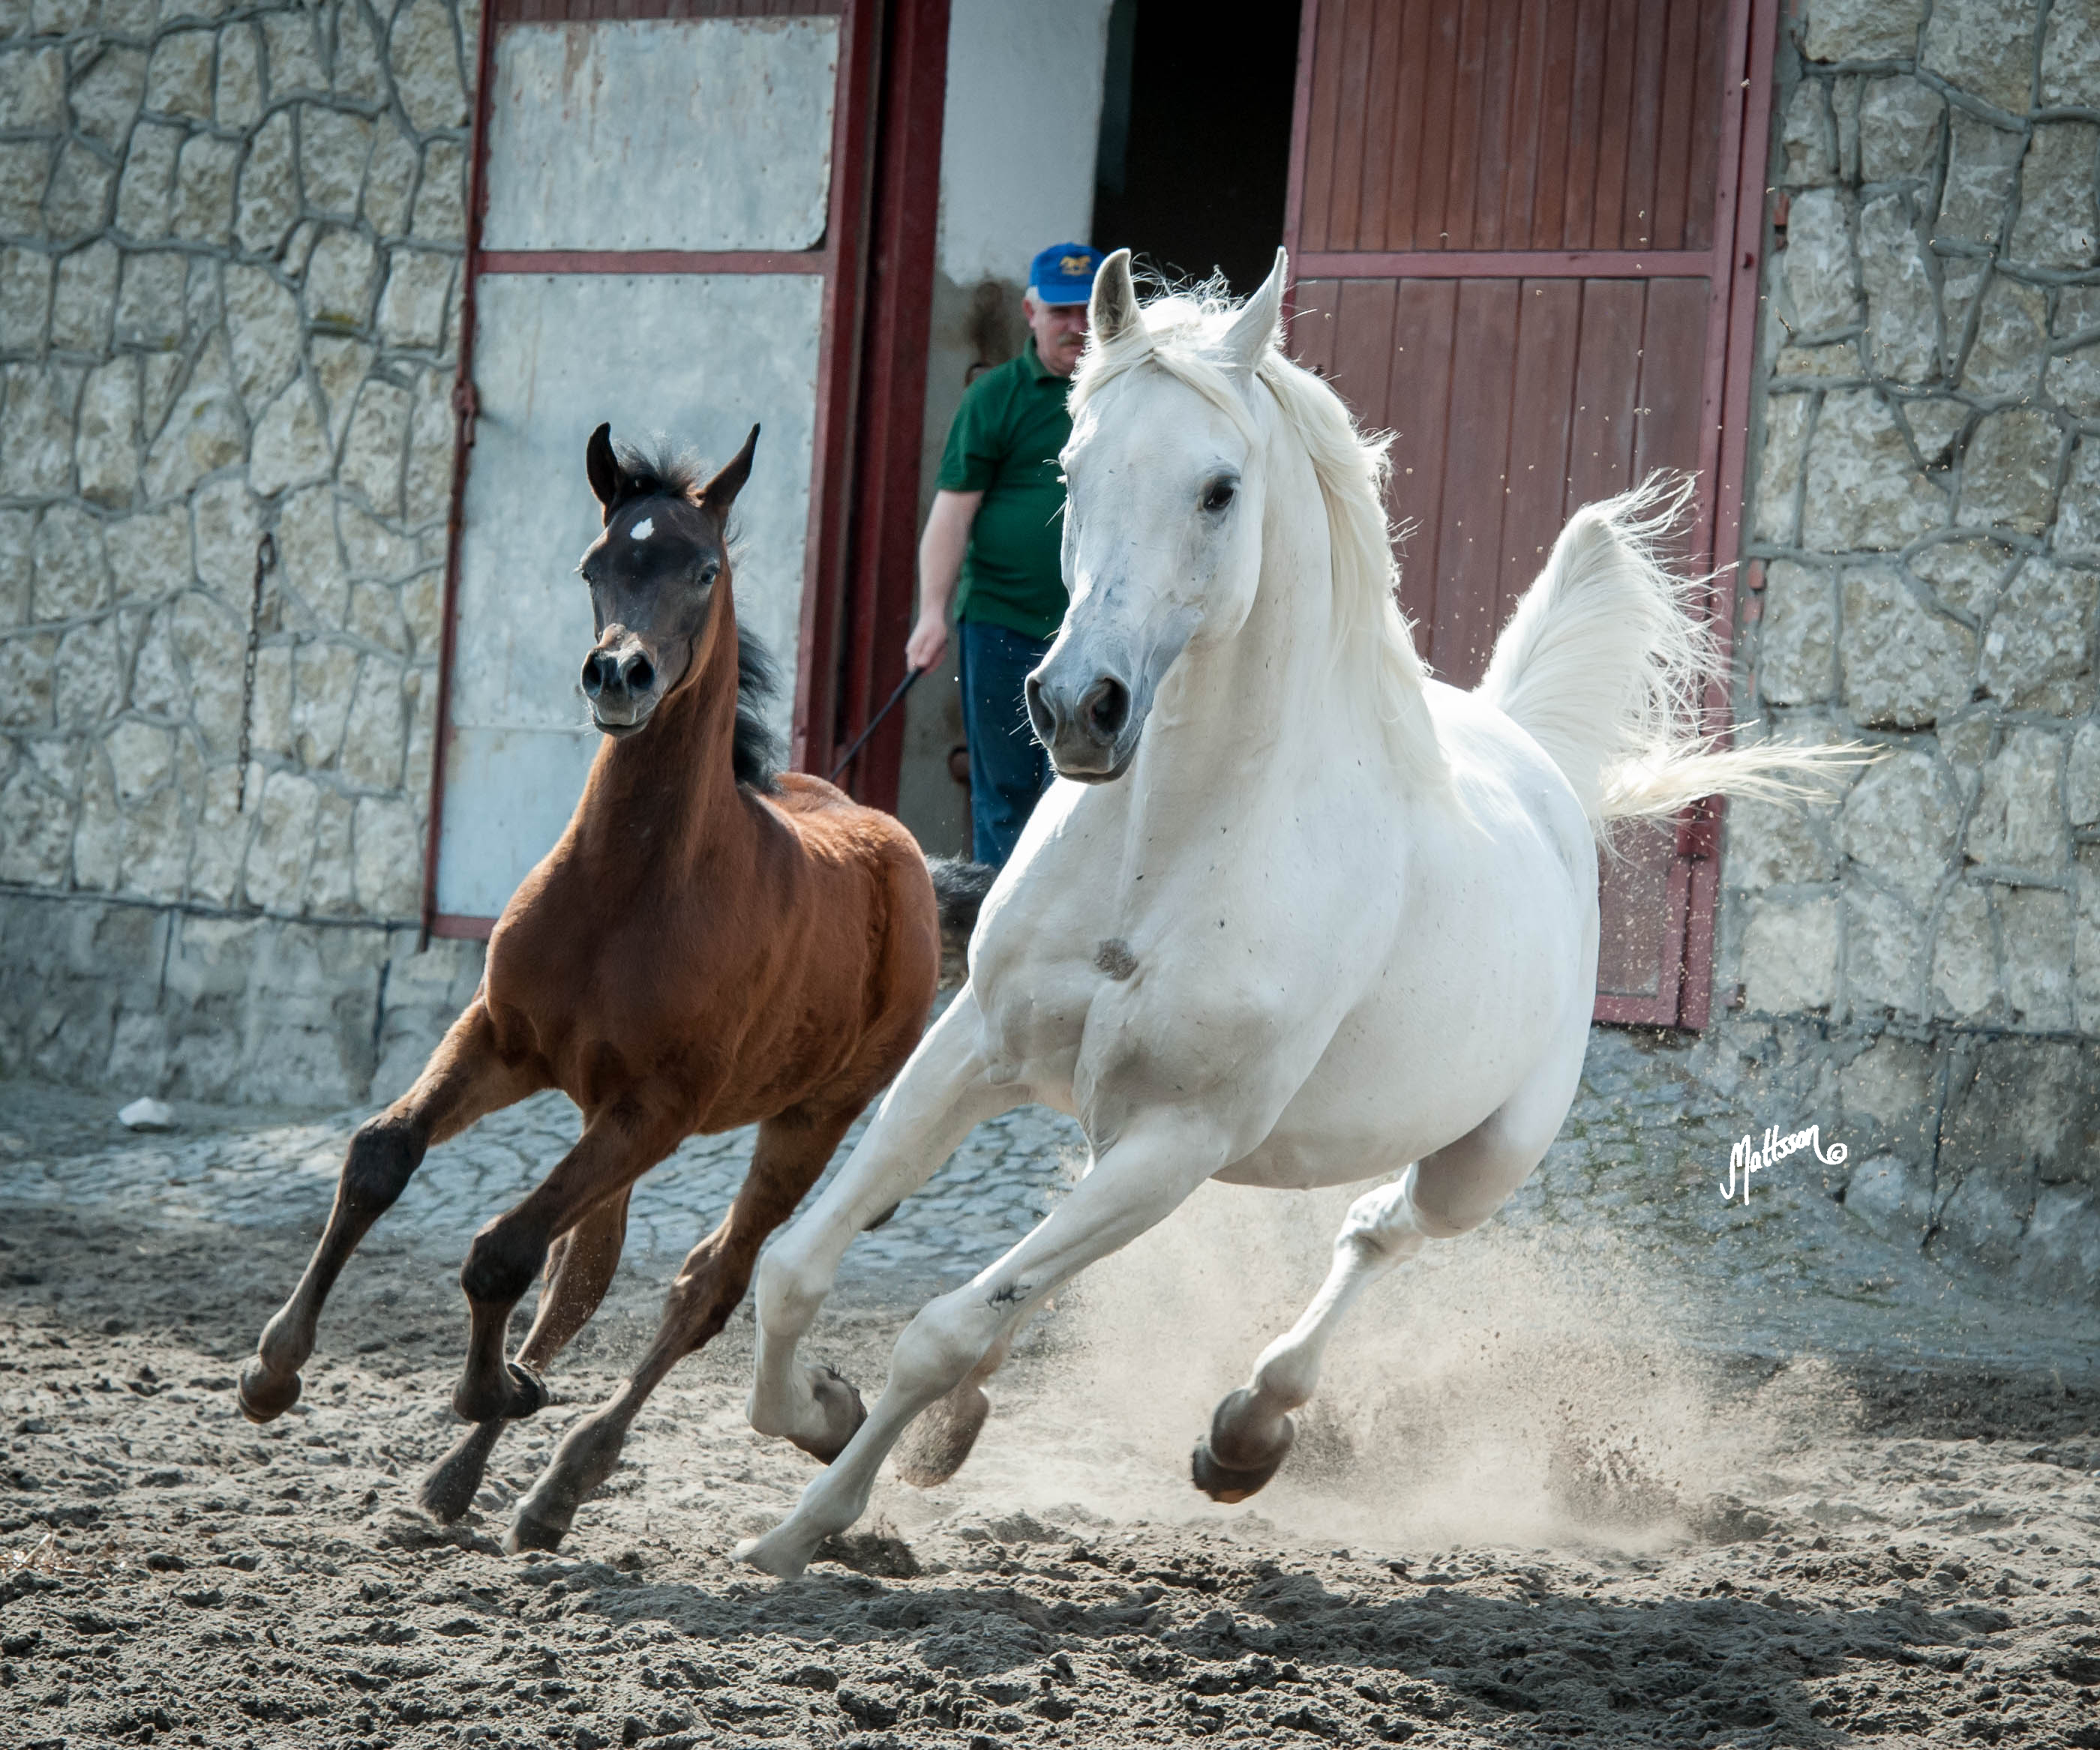 Galilea (Laheeb x Georgia) at Michalow in April 2015 with colt by Vitorio TO